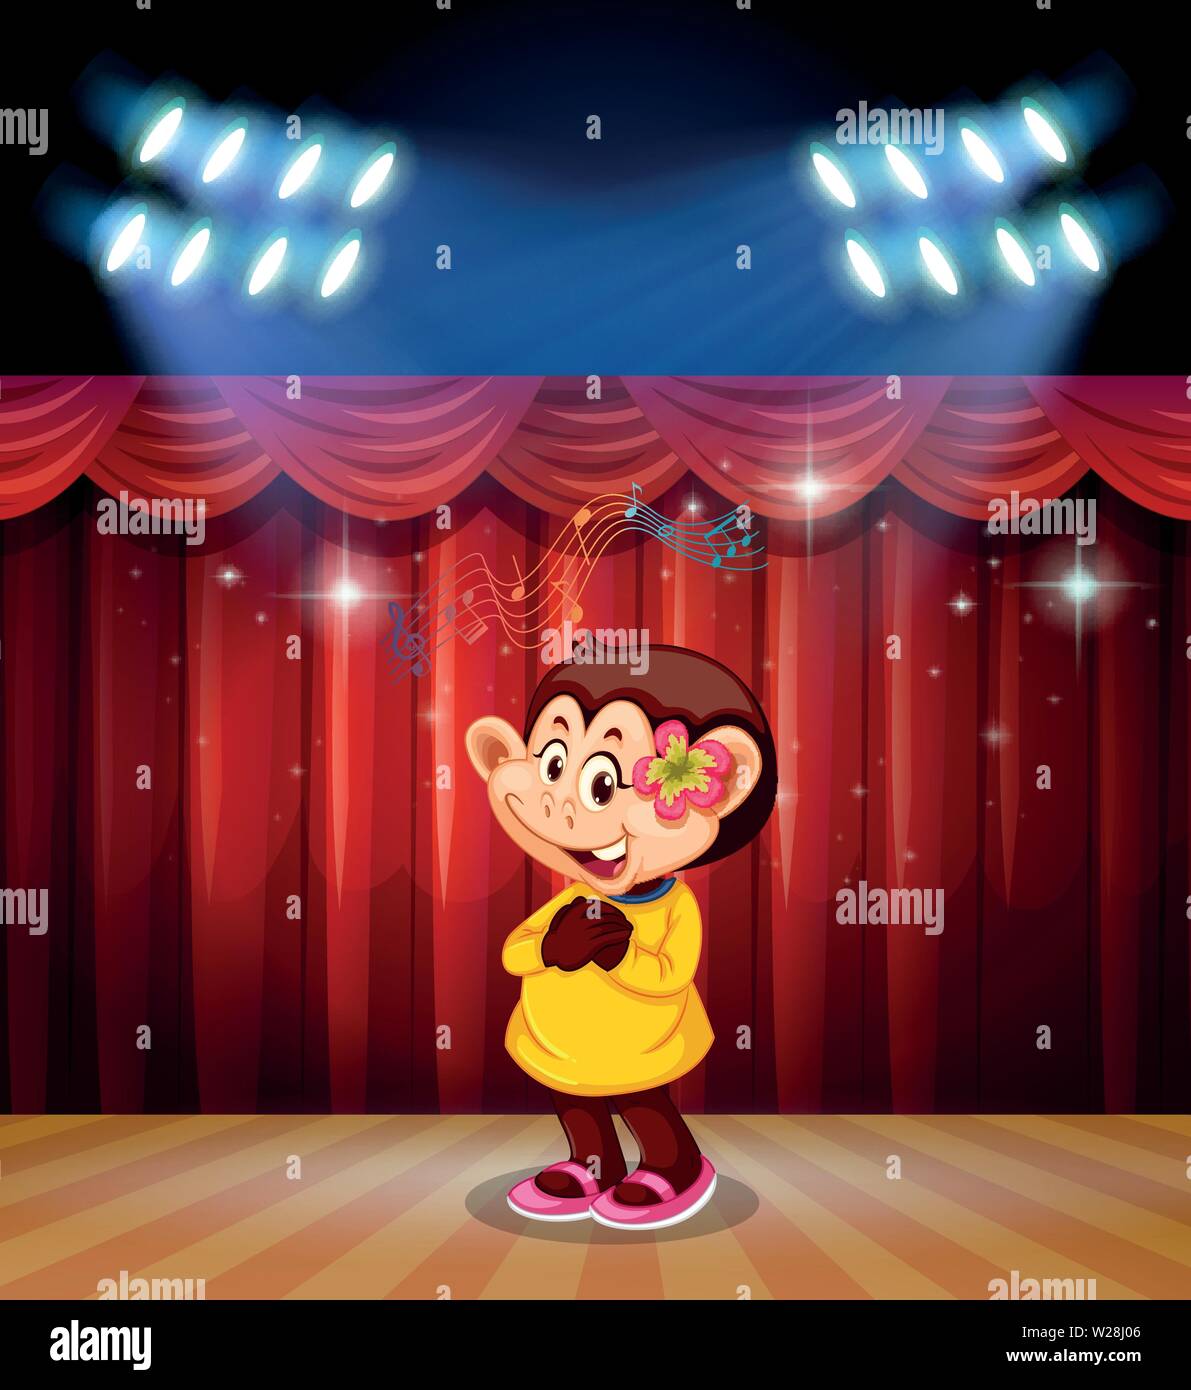 A monkey perform on stage illustration Stock Vector